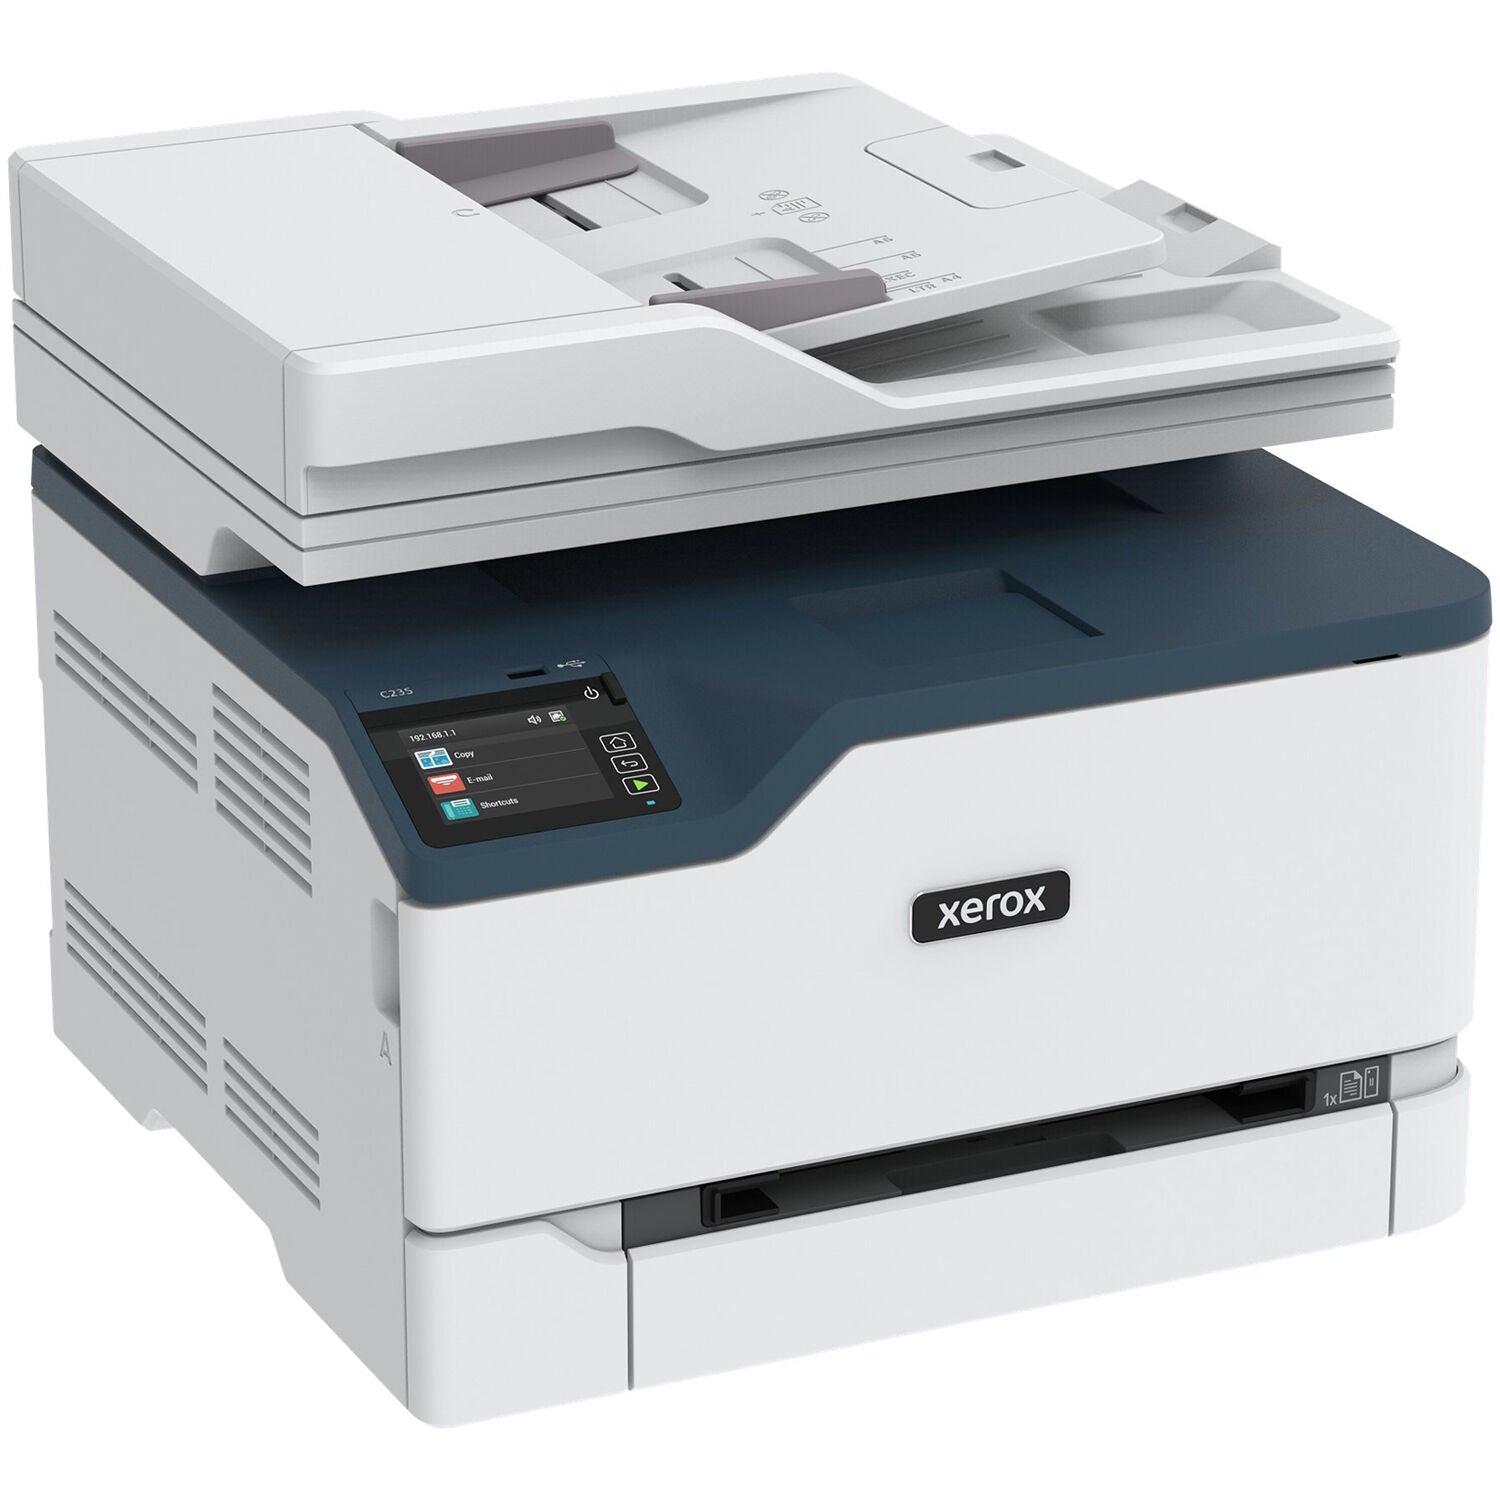 Absolute Toner $749/Month - Wireless Color Xerox C235 (C235/DNI) Multifunction Photocopier Printer Scanner With Letter/Legal, Automatic 2-Sided Print Showroom Color Copier